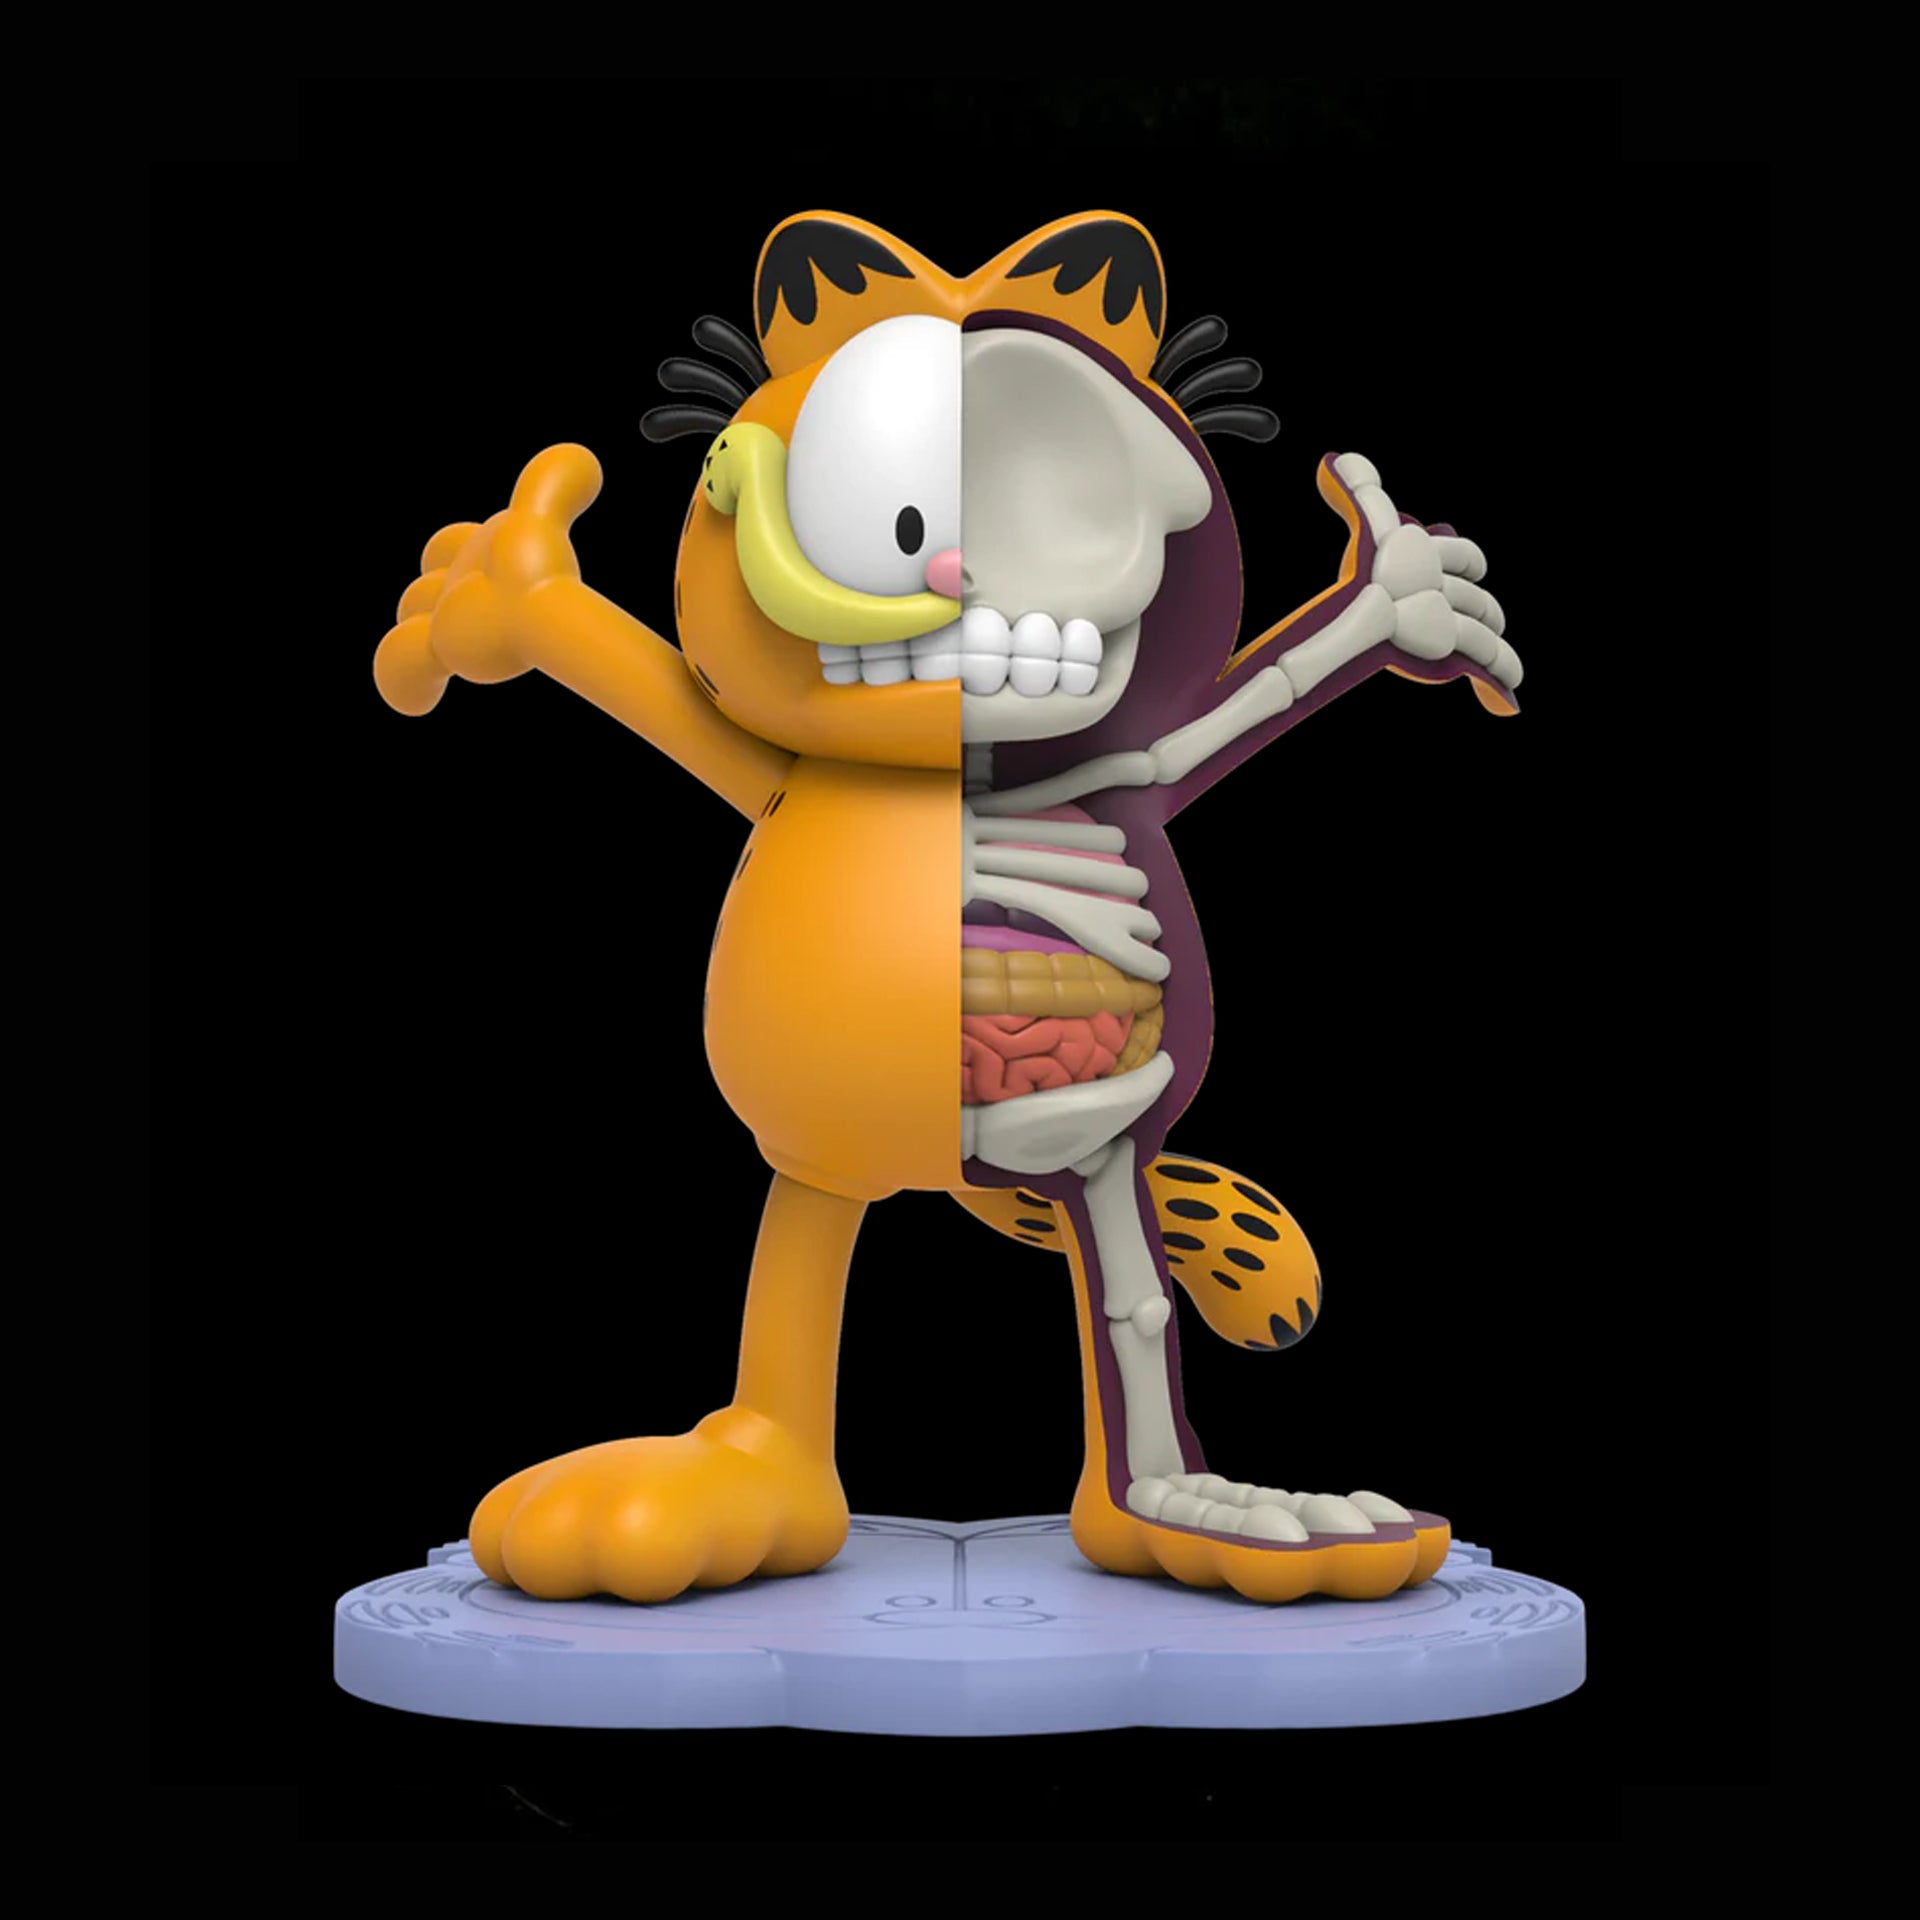 FREENY'S HIDDEN DISSECTIBLES: GARFIELD By Jason Freeny